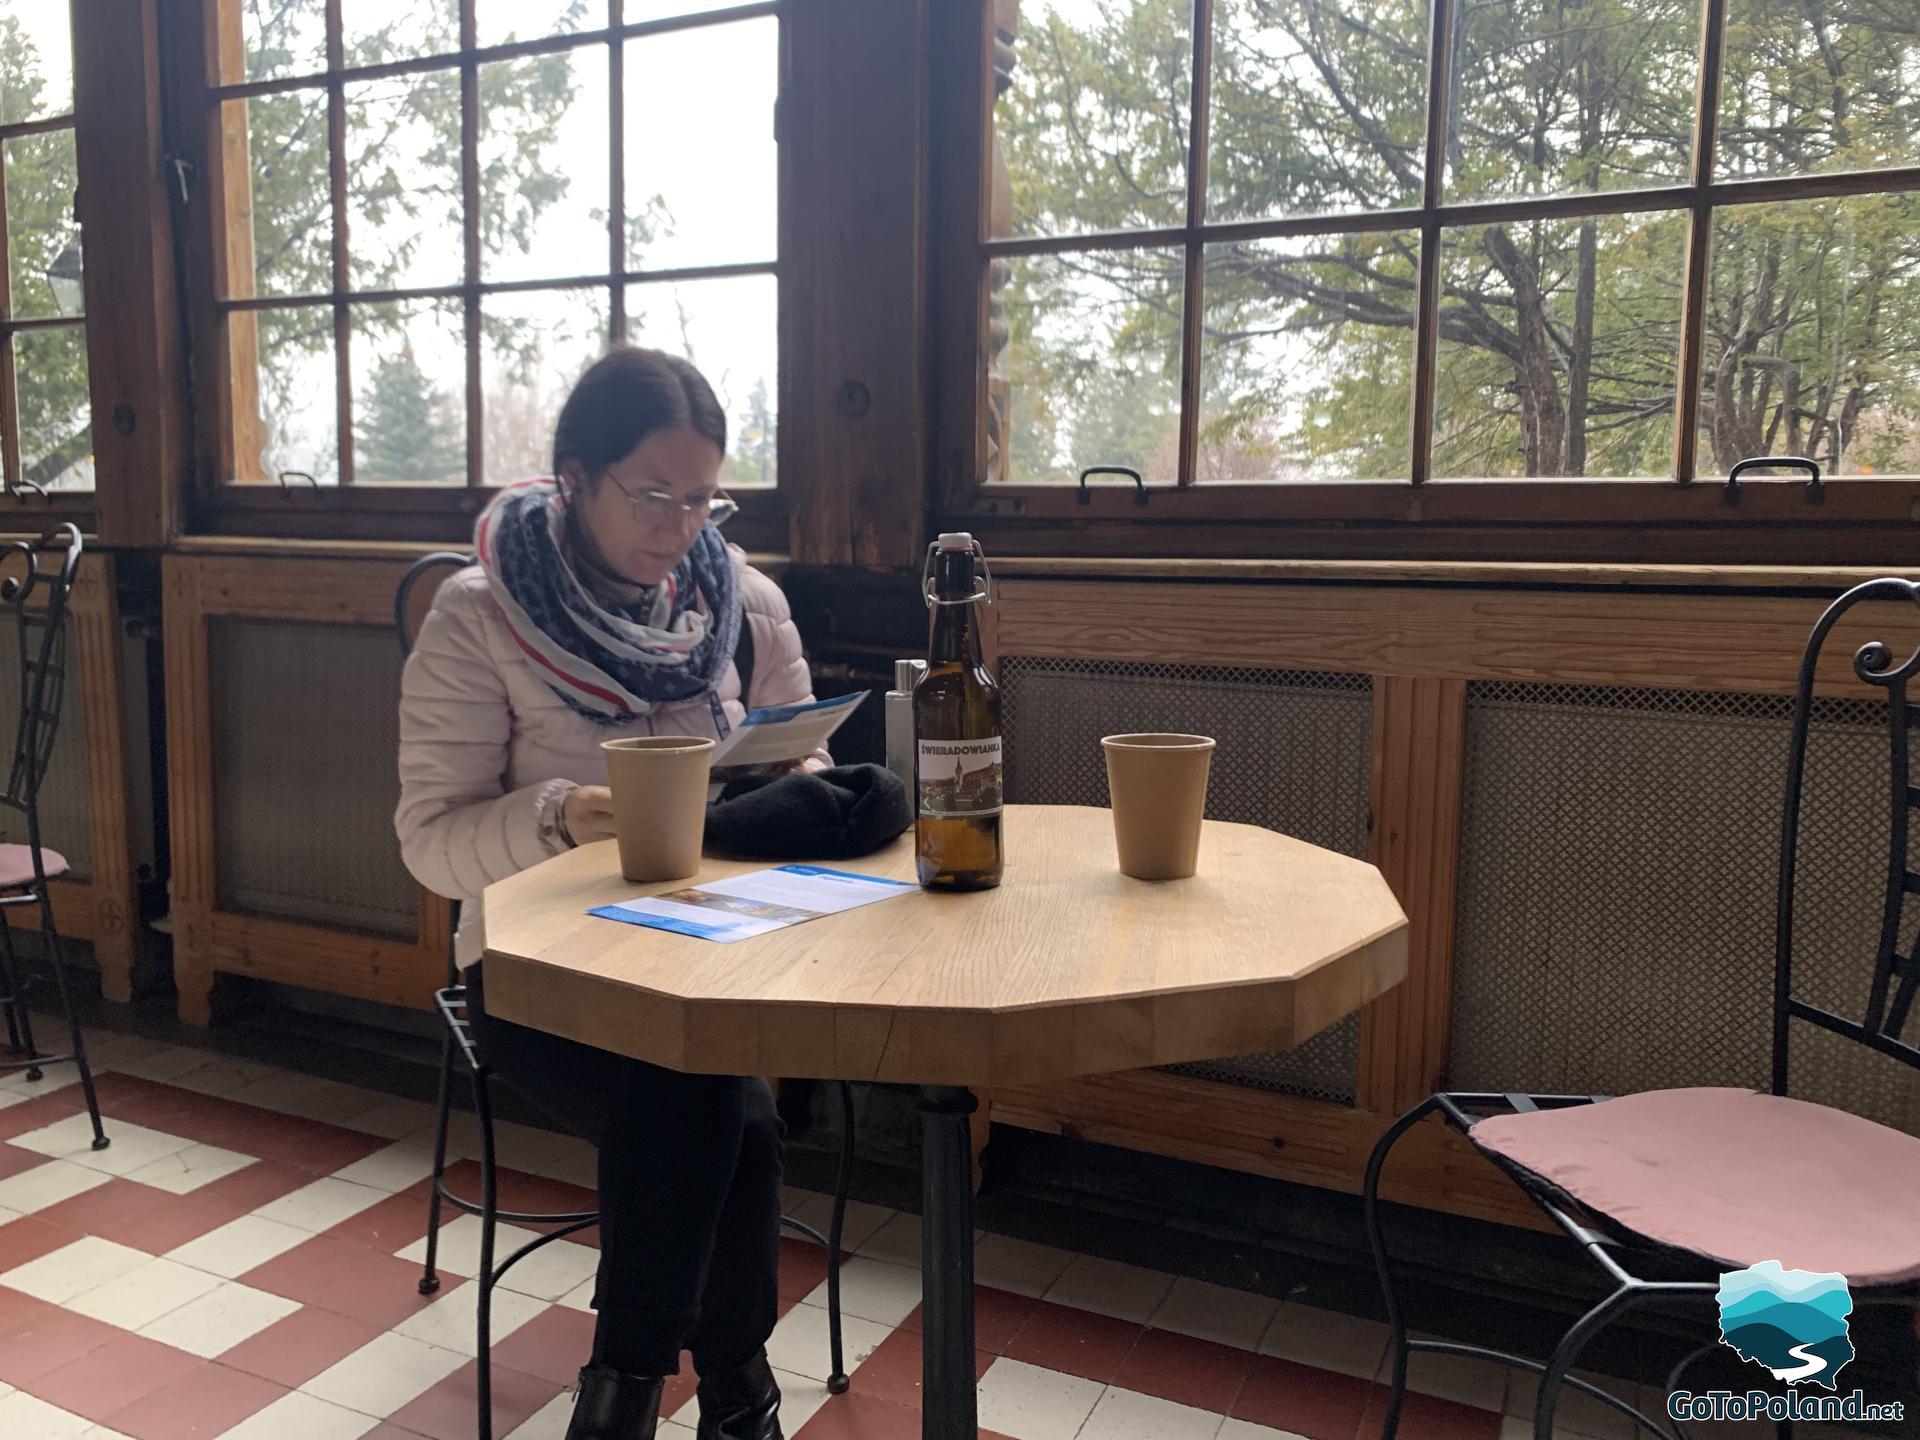 a woman is sitting at the table looking at some brochure, on the table is a bottle with healthy radon water